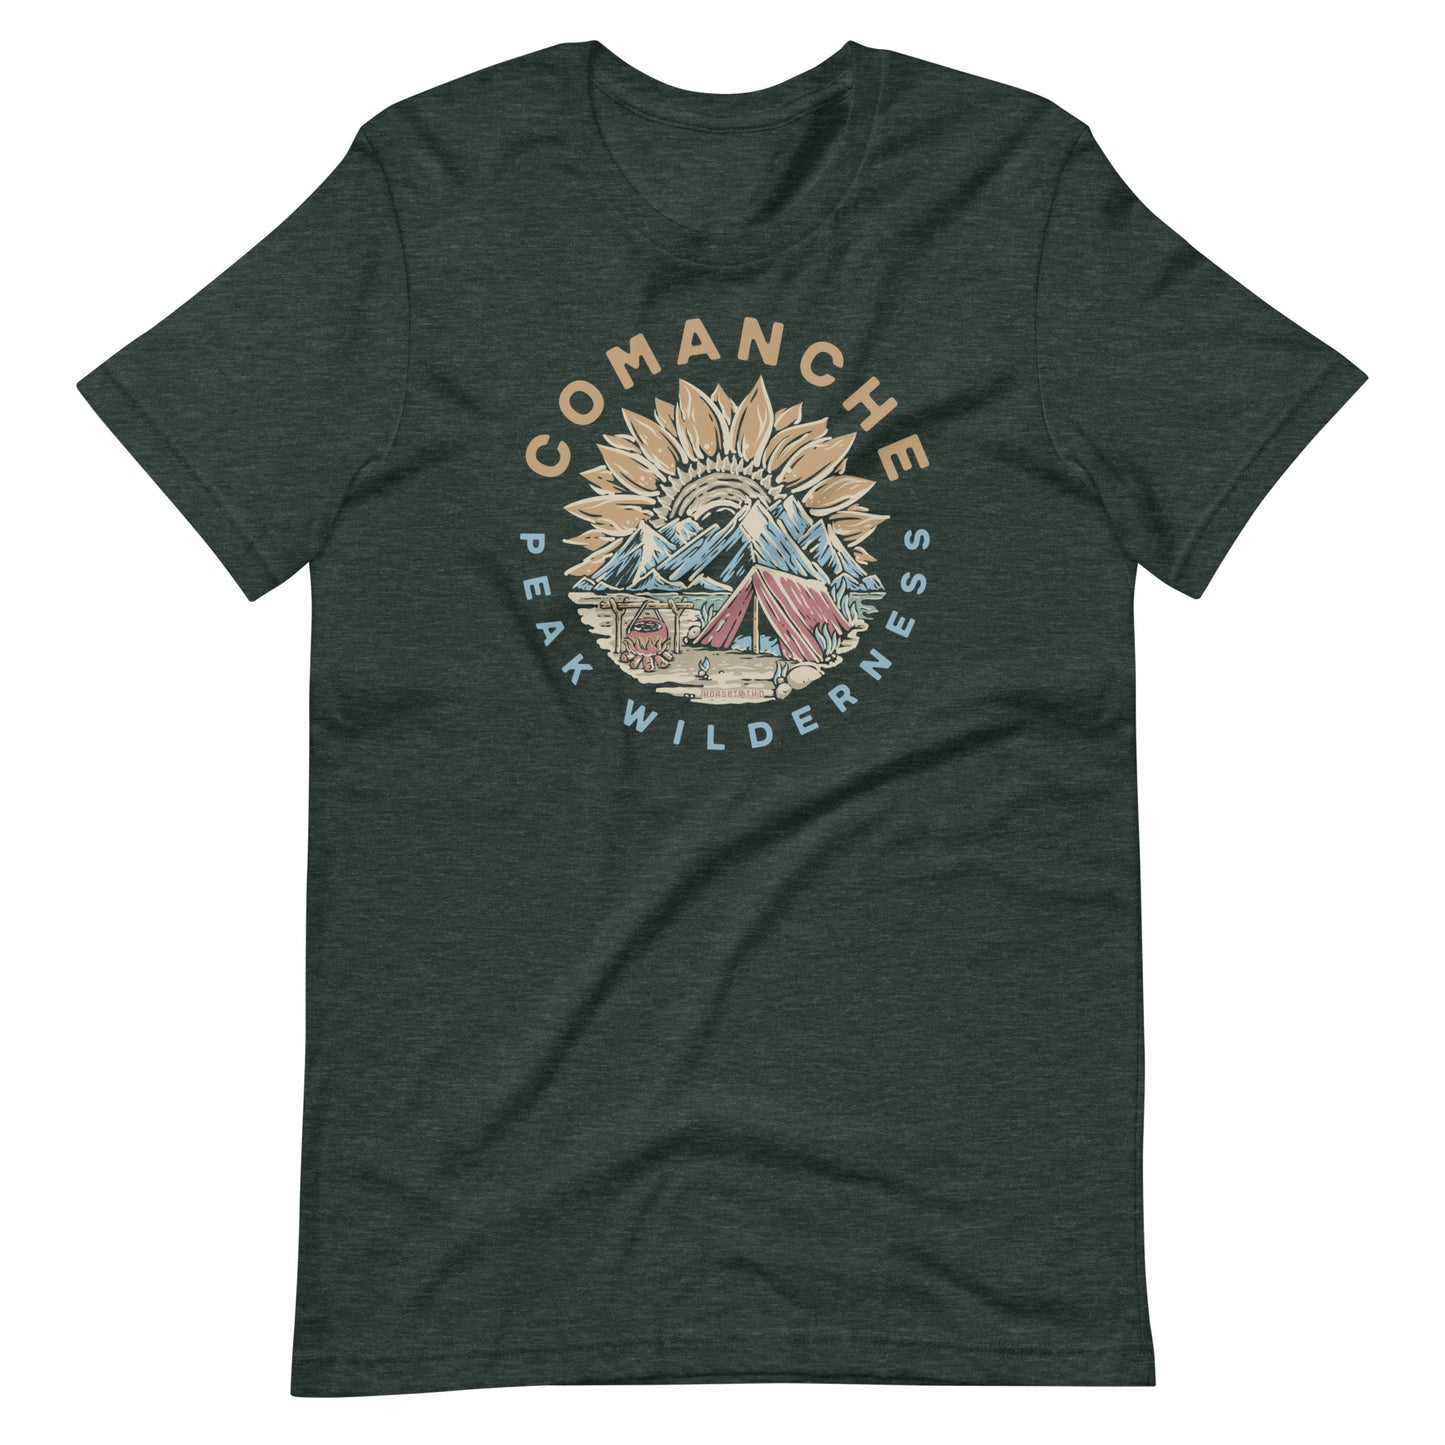 High-quality Bella Canvas 3001 t-shirt, imprinted with a stunning graphic of Comanche Peak Wilderness, symbolizing Colorado's wild landscapes.